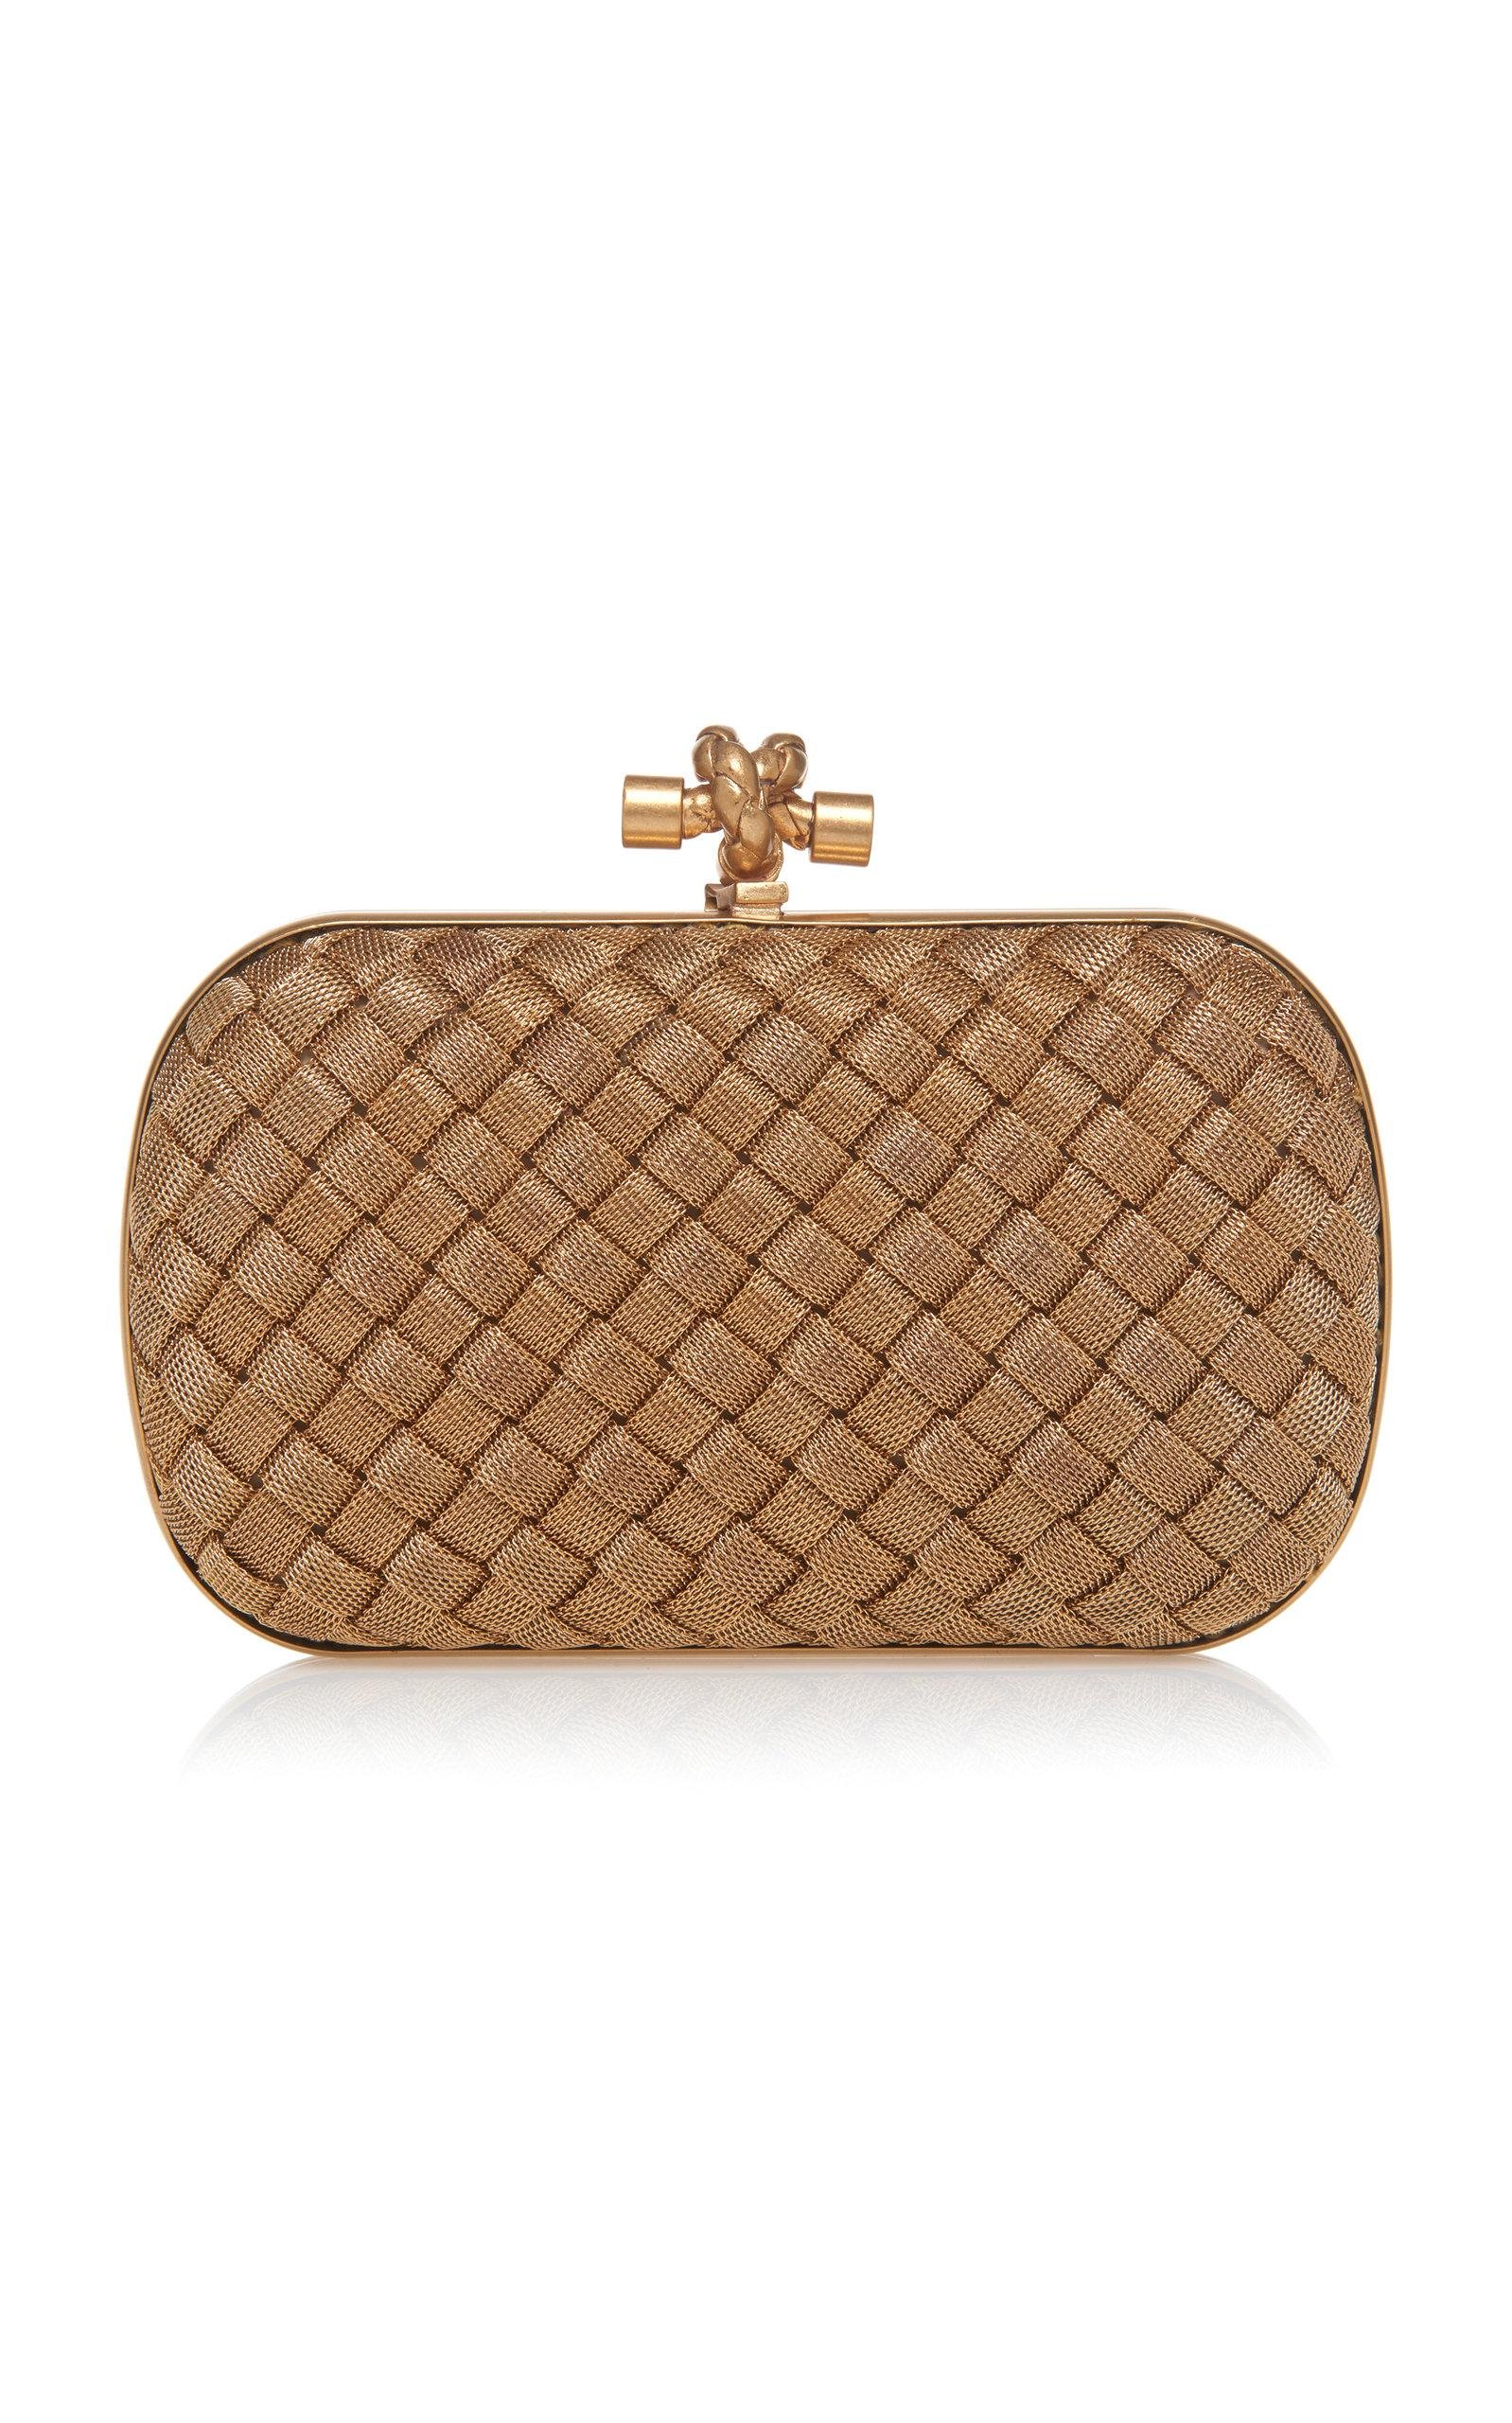 Saylor Collection Gold Knots Clutch